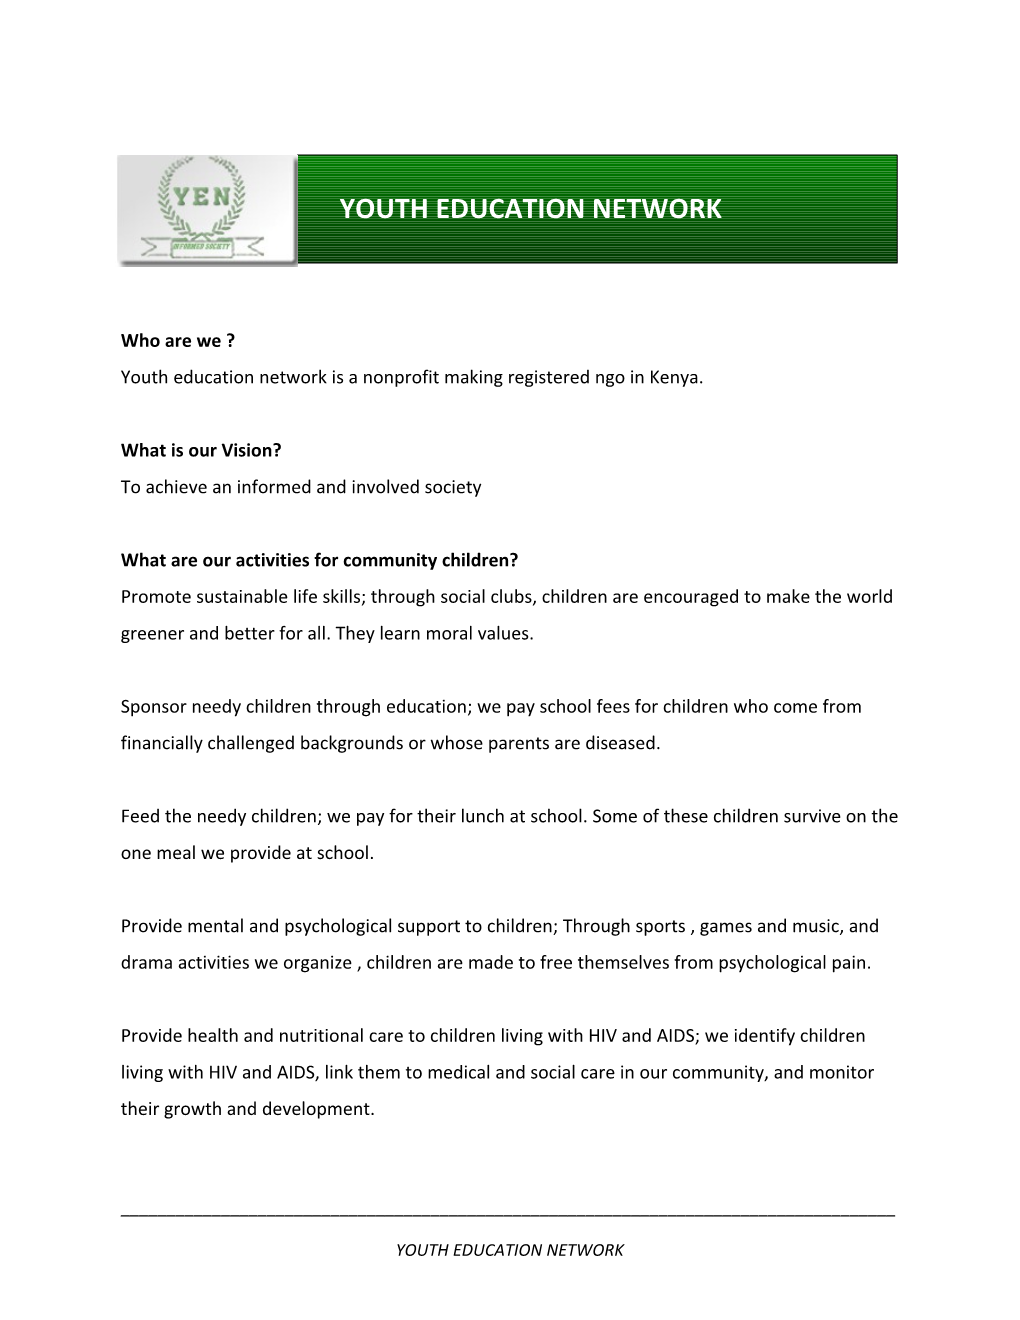 Youth Education Network Is a Nonprofit Making Registered Ngo in Kenya